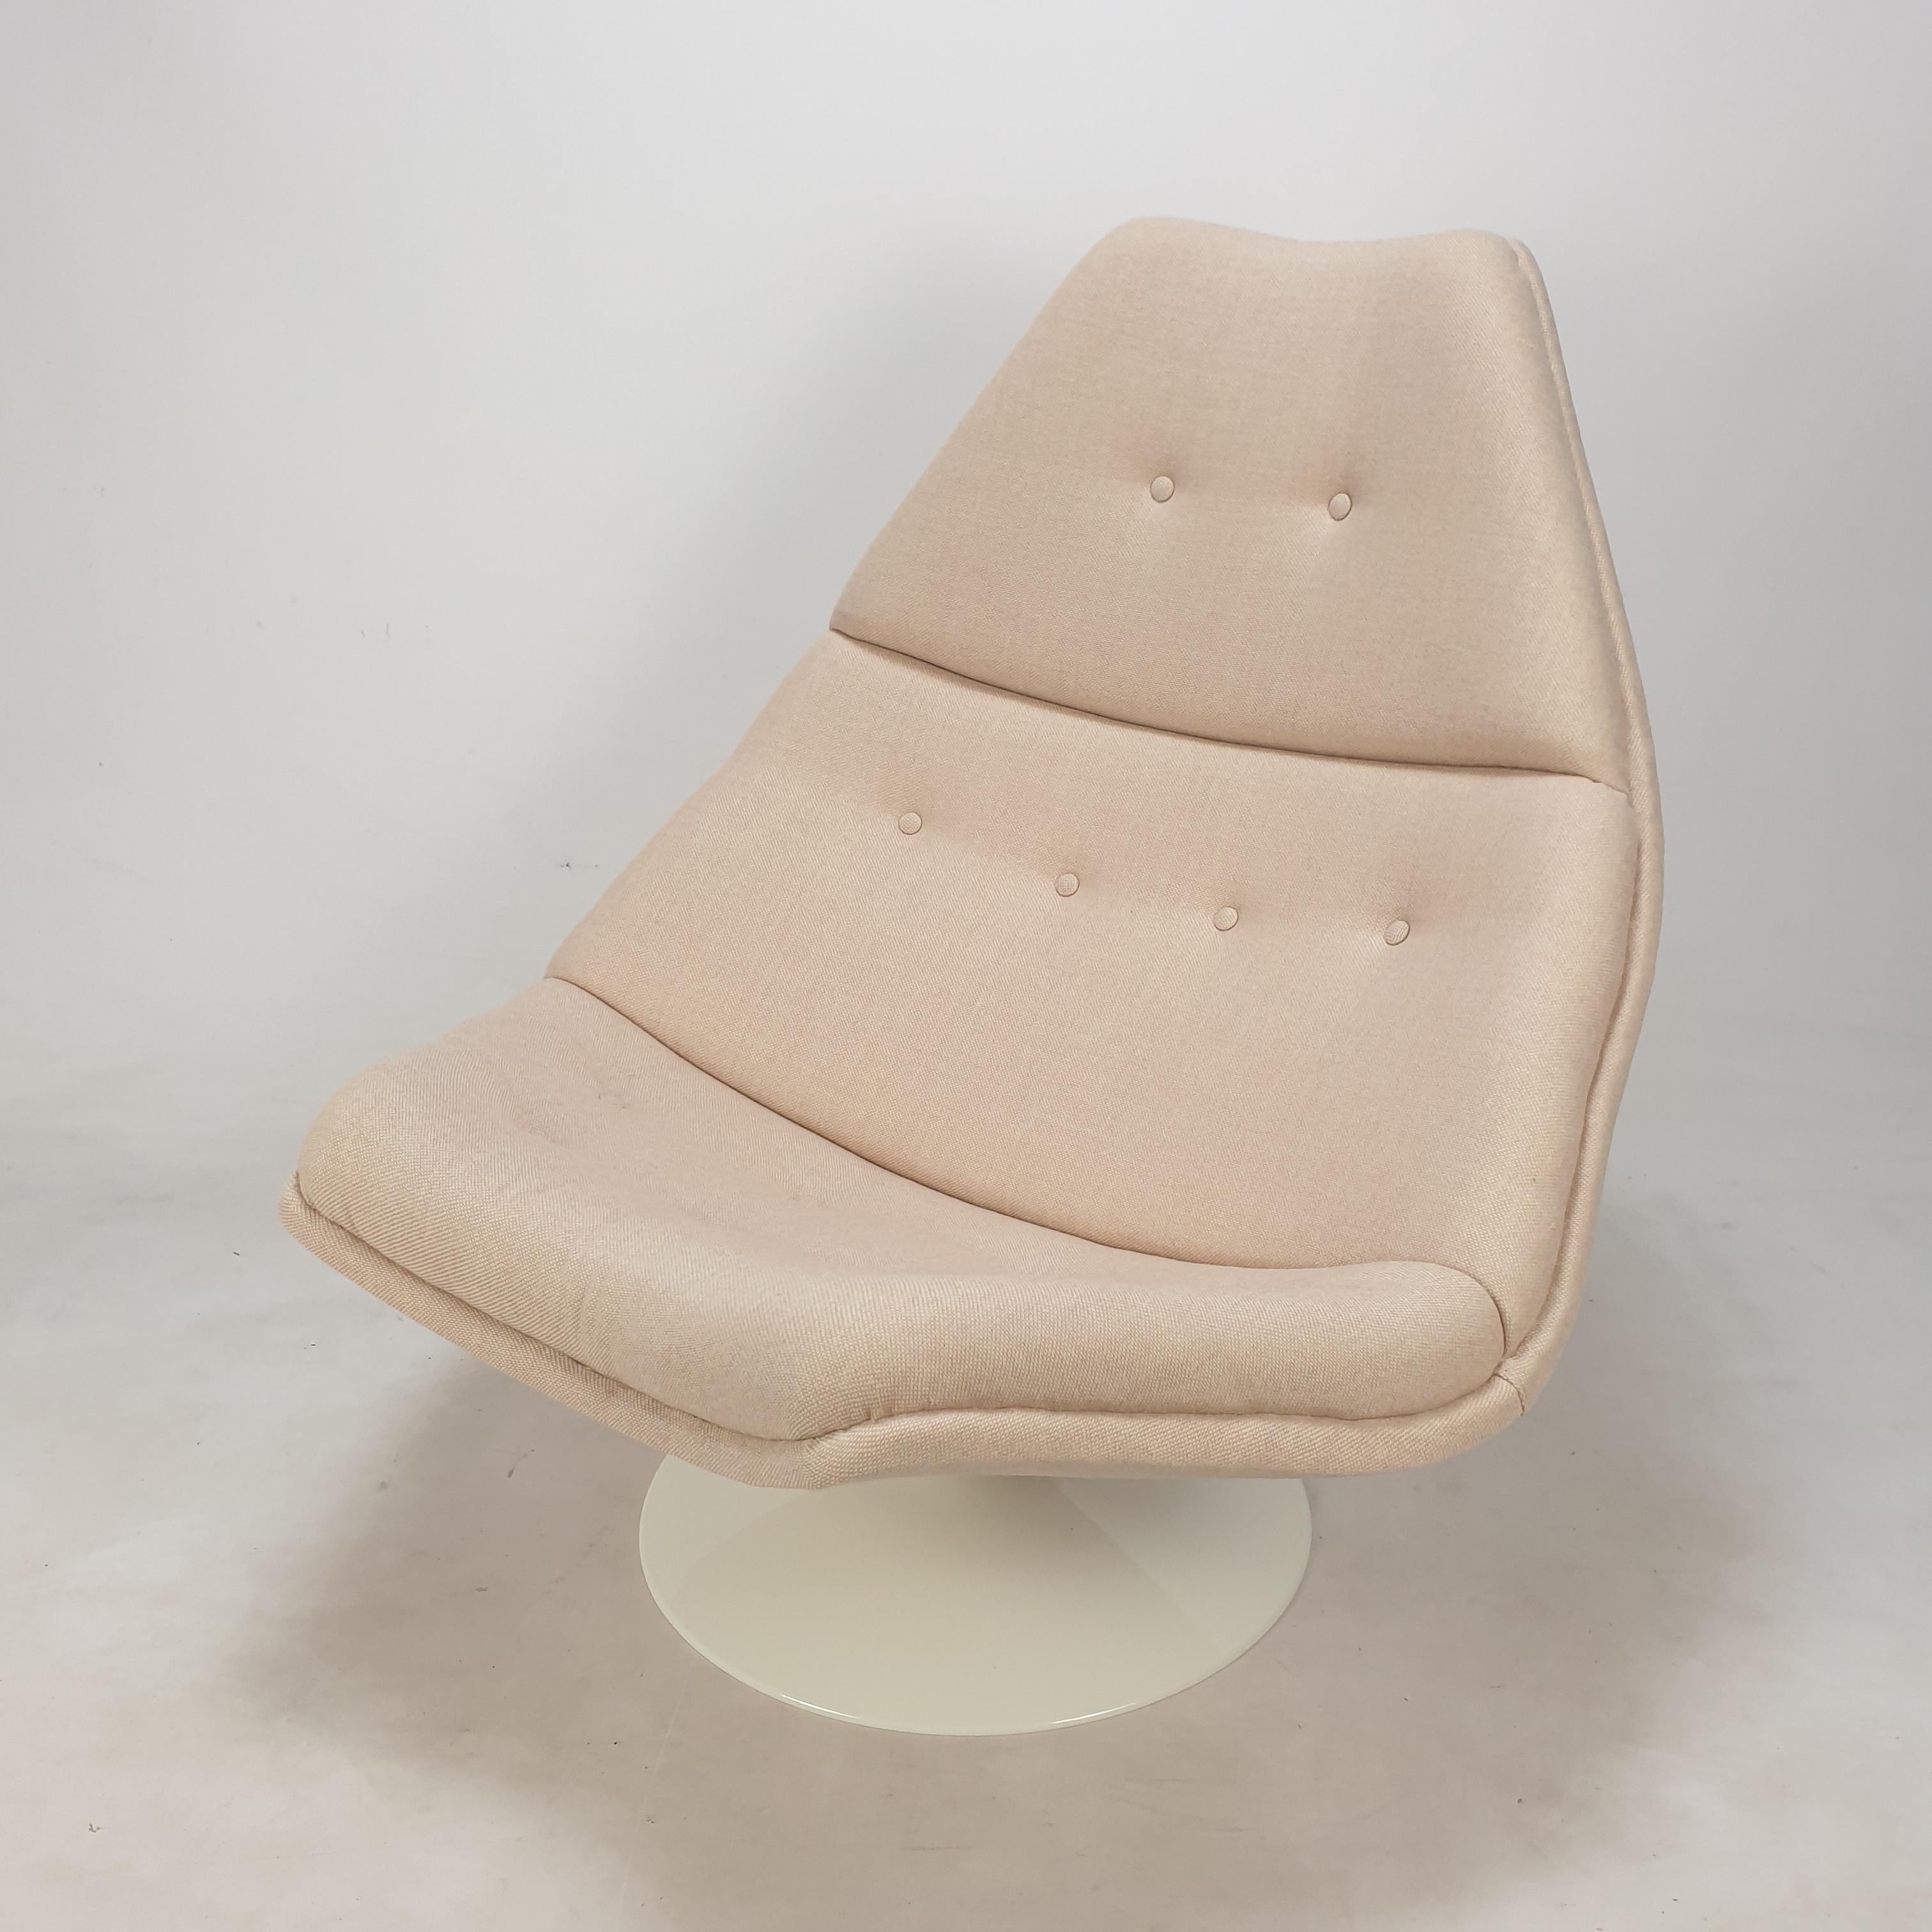 Very comfortable Artifort lounge chair. 
Designed by the famous English designer Geoffrey Harcourt in the 60's. 

The chair is just restored with new fabric and new foam.
It is reupholstered with very nice wool fabric.
The foot is